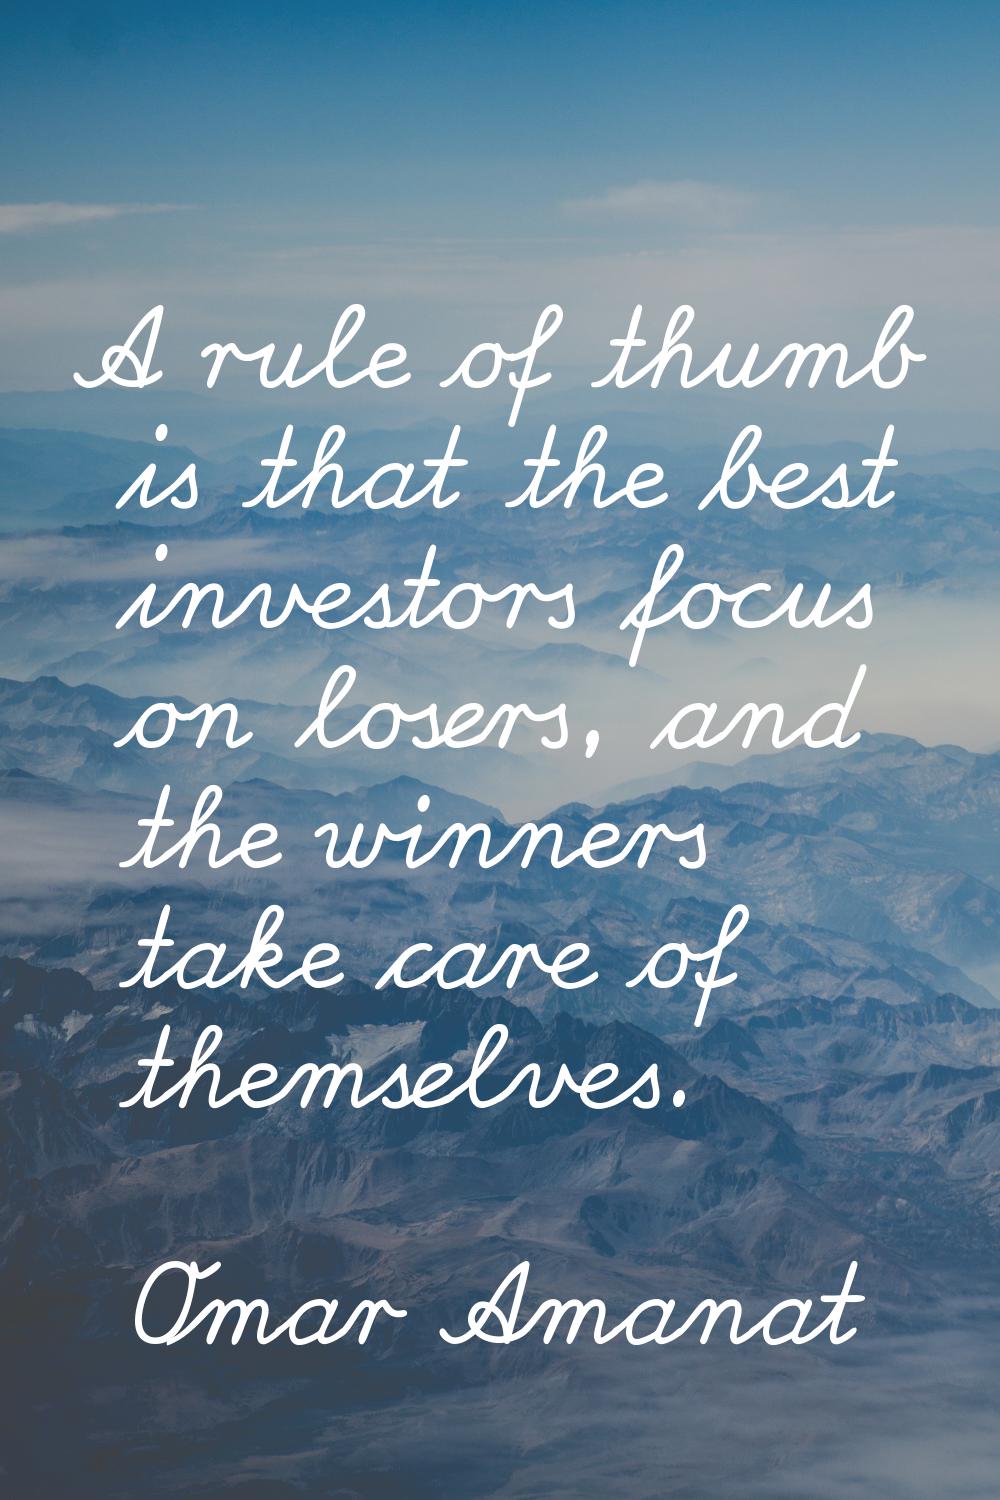 A rule of thumb is that the best investors focus on losers, and the winners take care of themselves